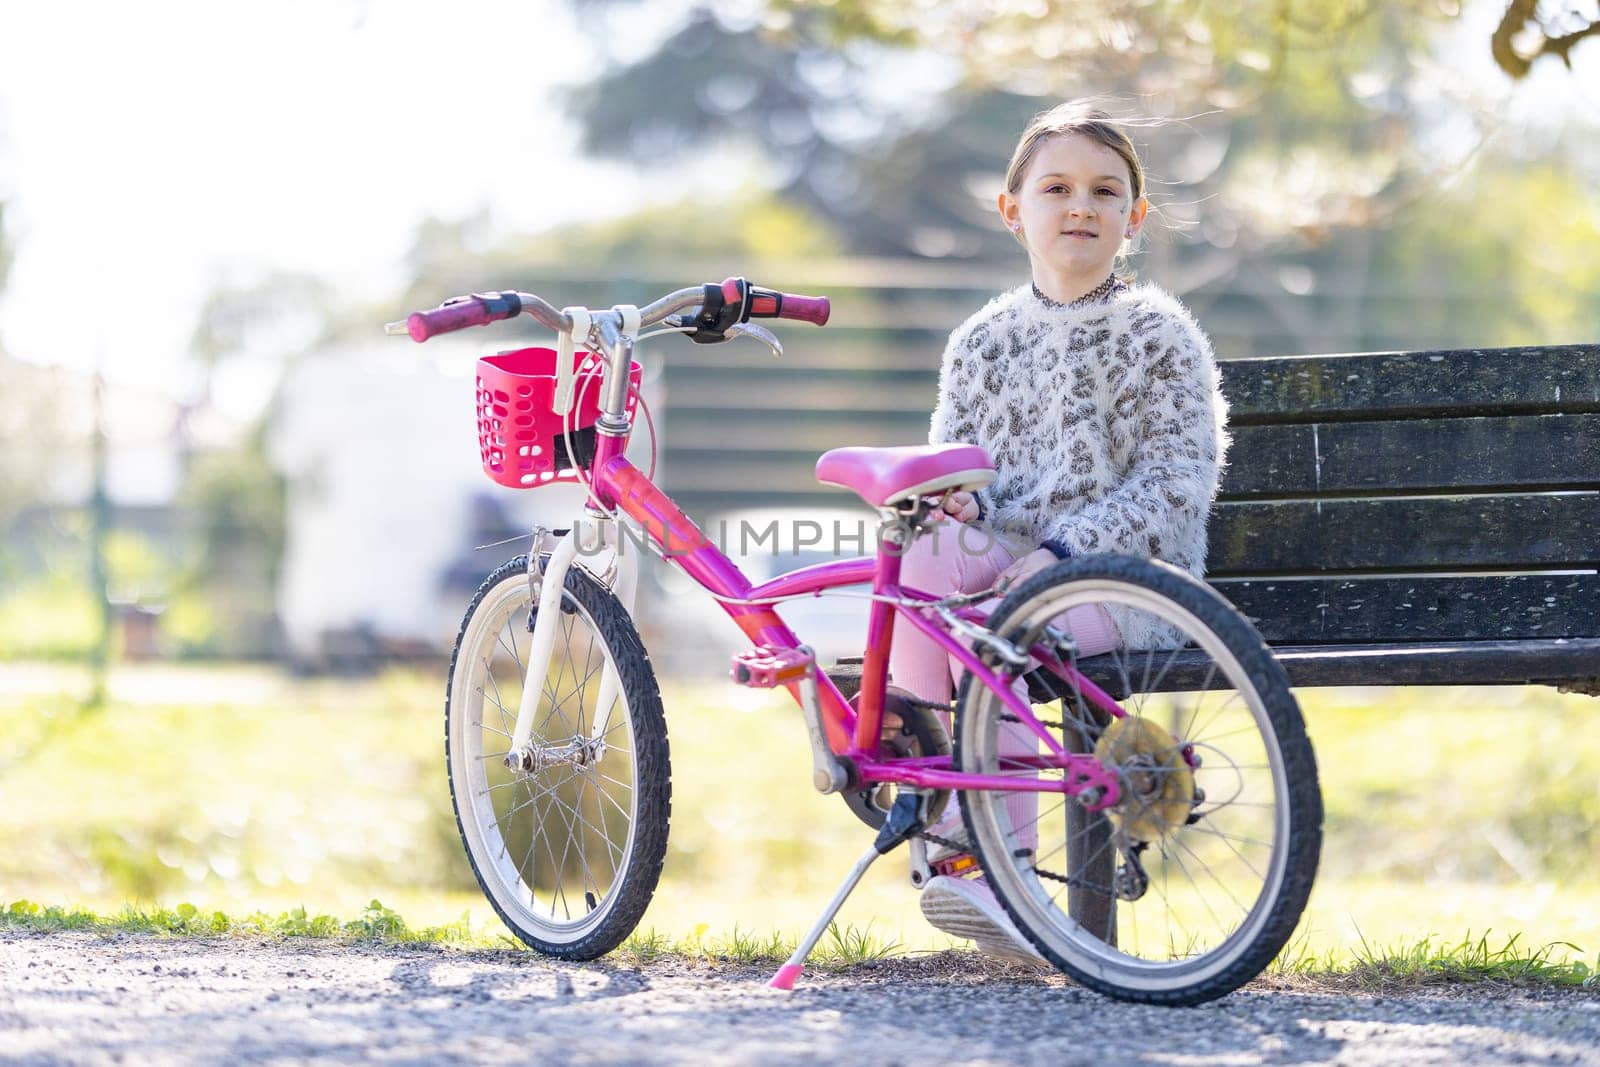 A young girl sits on a bench next to a pink bicycle. The bicycle has a basket on the front and a pink seat. The girl is smiling and he is enjoying her time outdoors